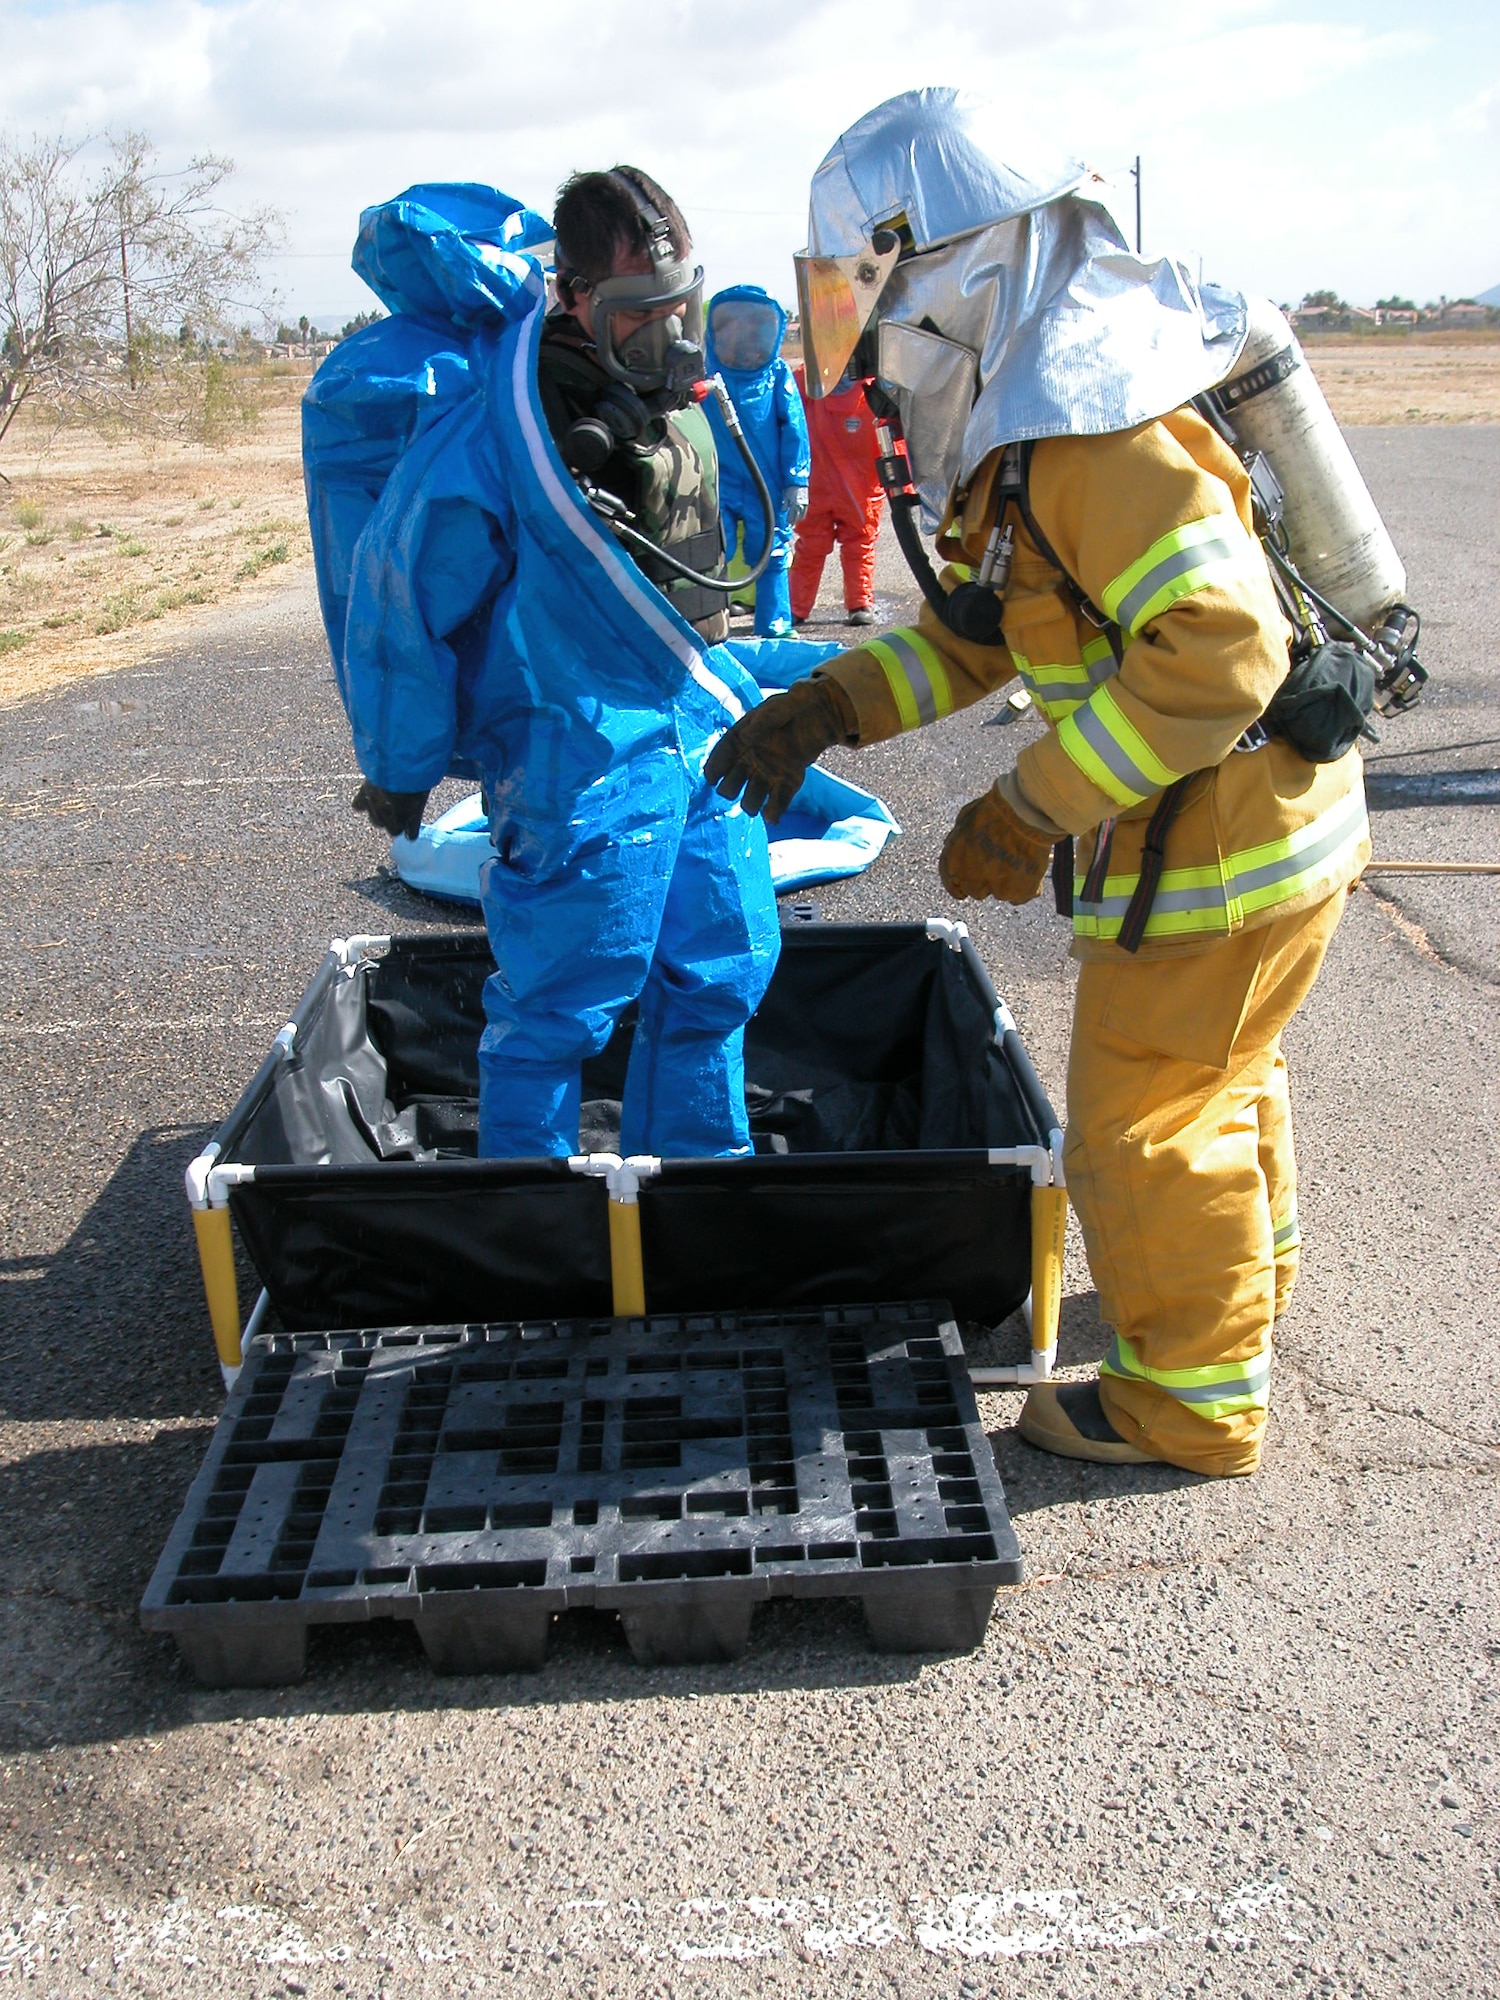 Members of the 452nd Fire Department helps a member of the 452nd CEX Emergency Management remove a “Hazmat” suit after being processed during decontamination operations. (U.S Air Force photo by Senior Airman Kara McGrath)